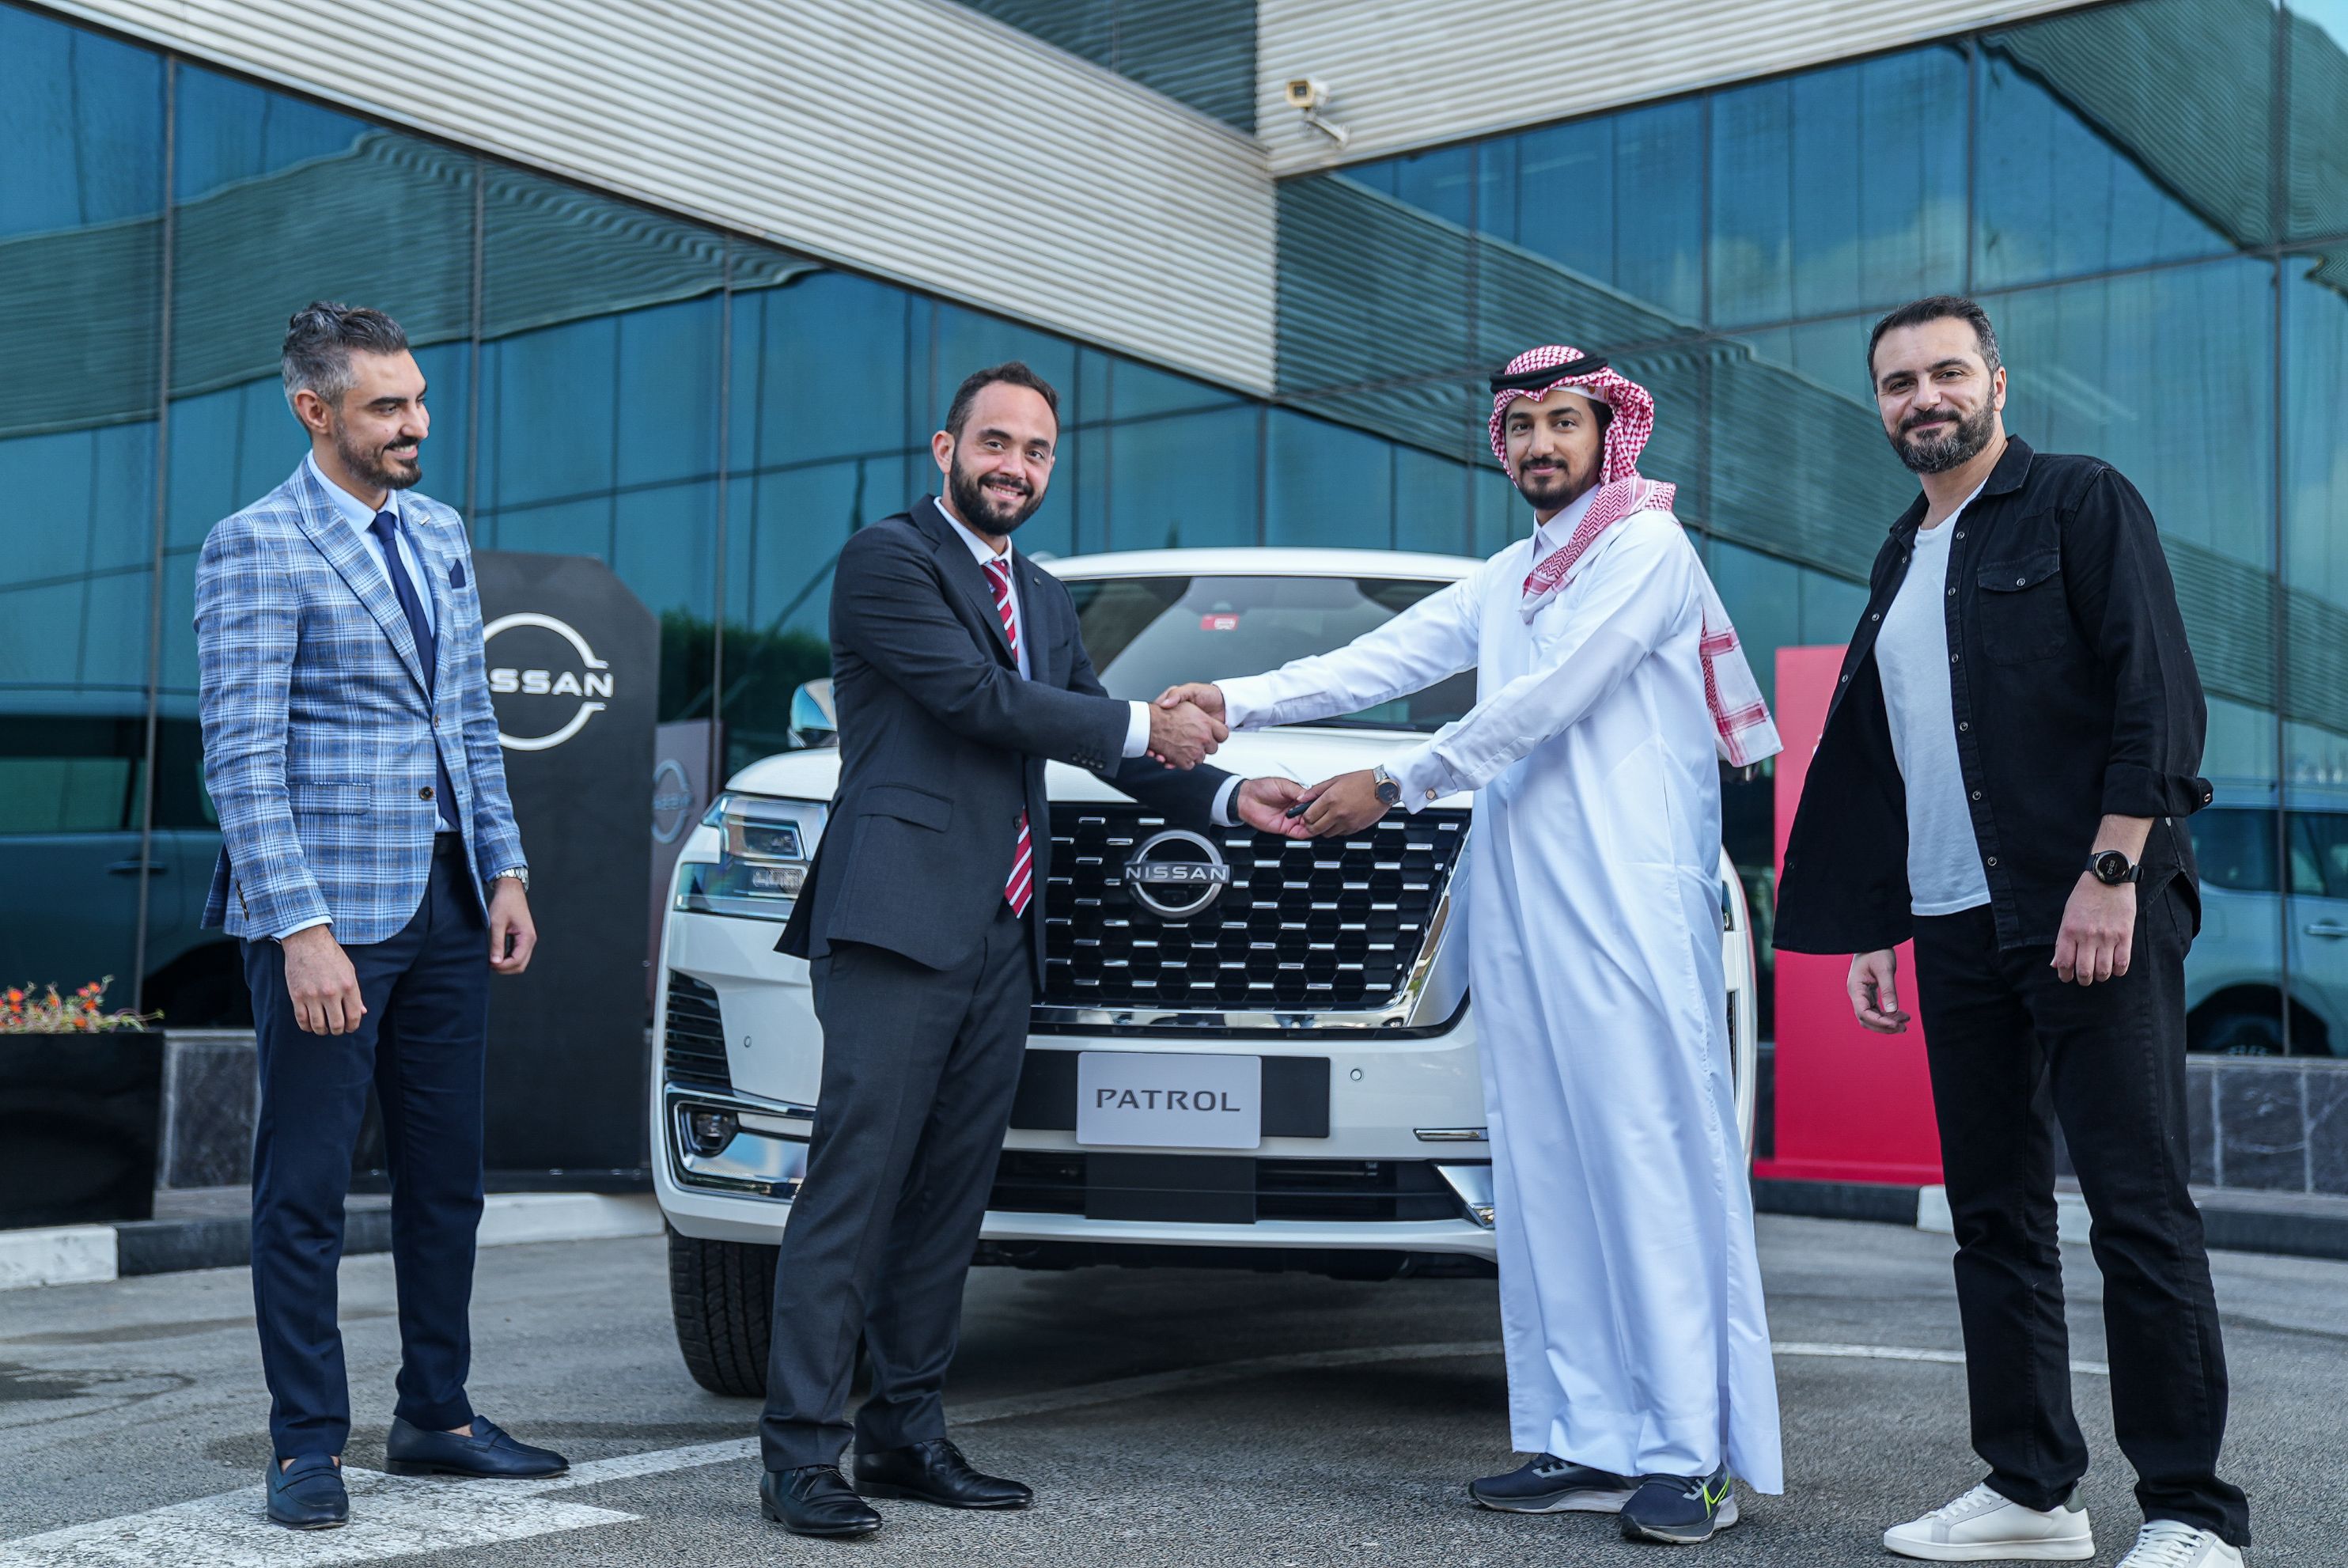 Three 2022 Nissan Patrol 70th Anniversary models handed over to lucky winners in the Middle East